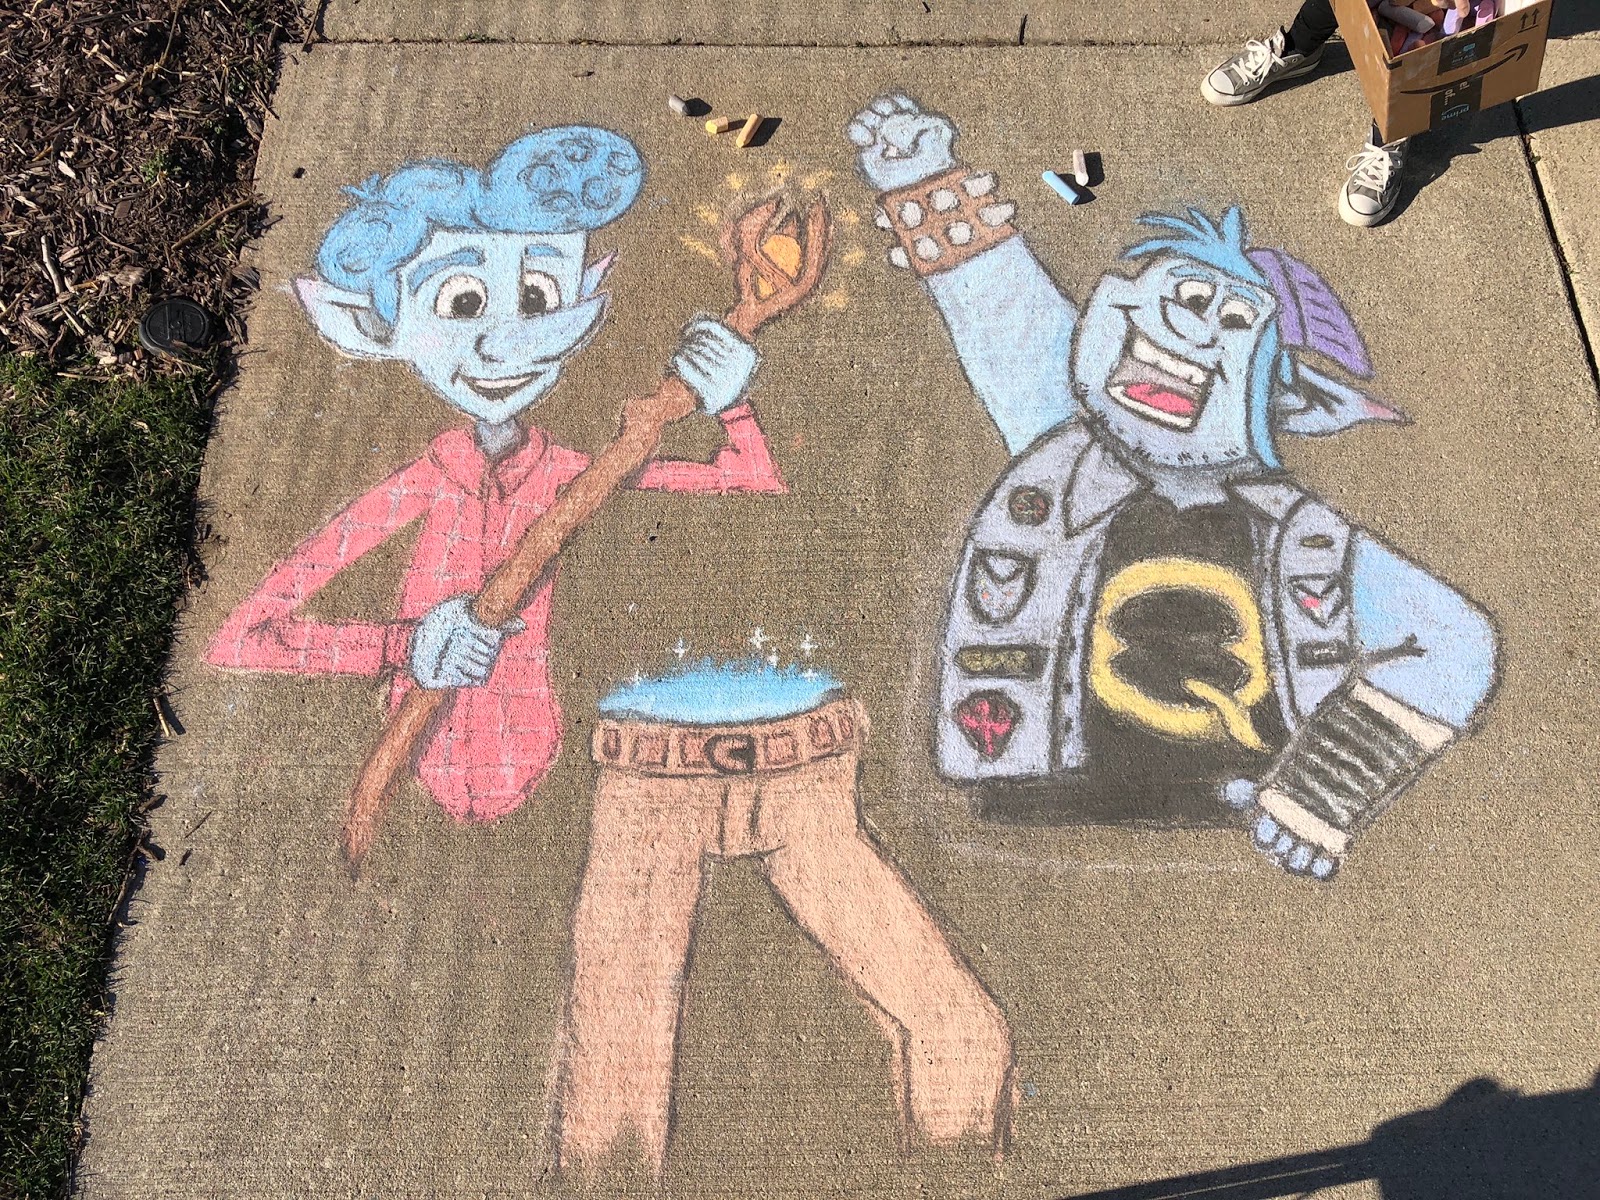 Watch How We Created Our Onward Chalk Art Details On How To